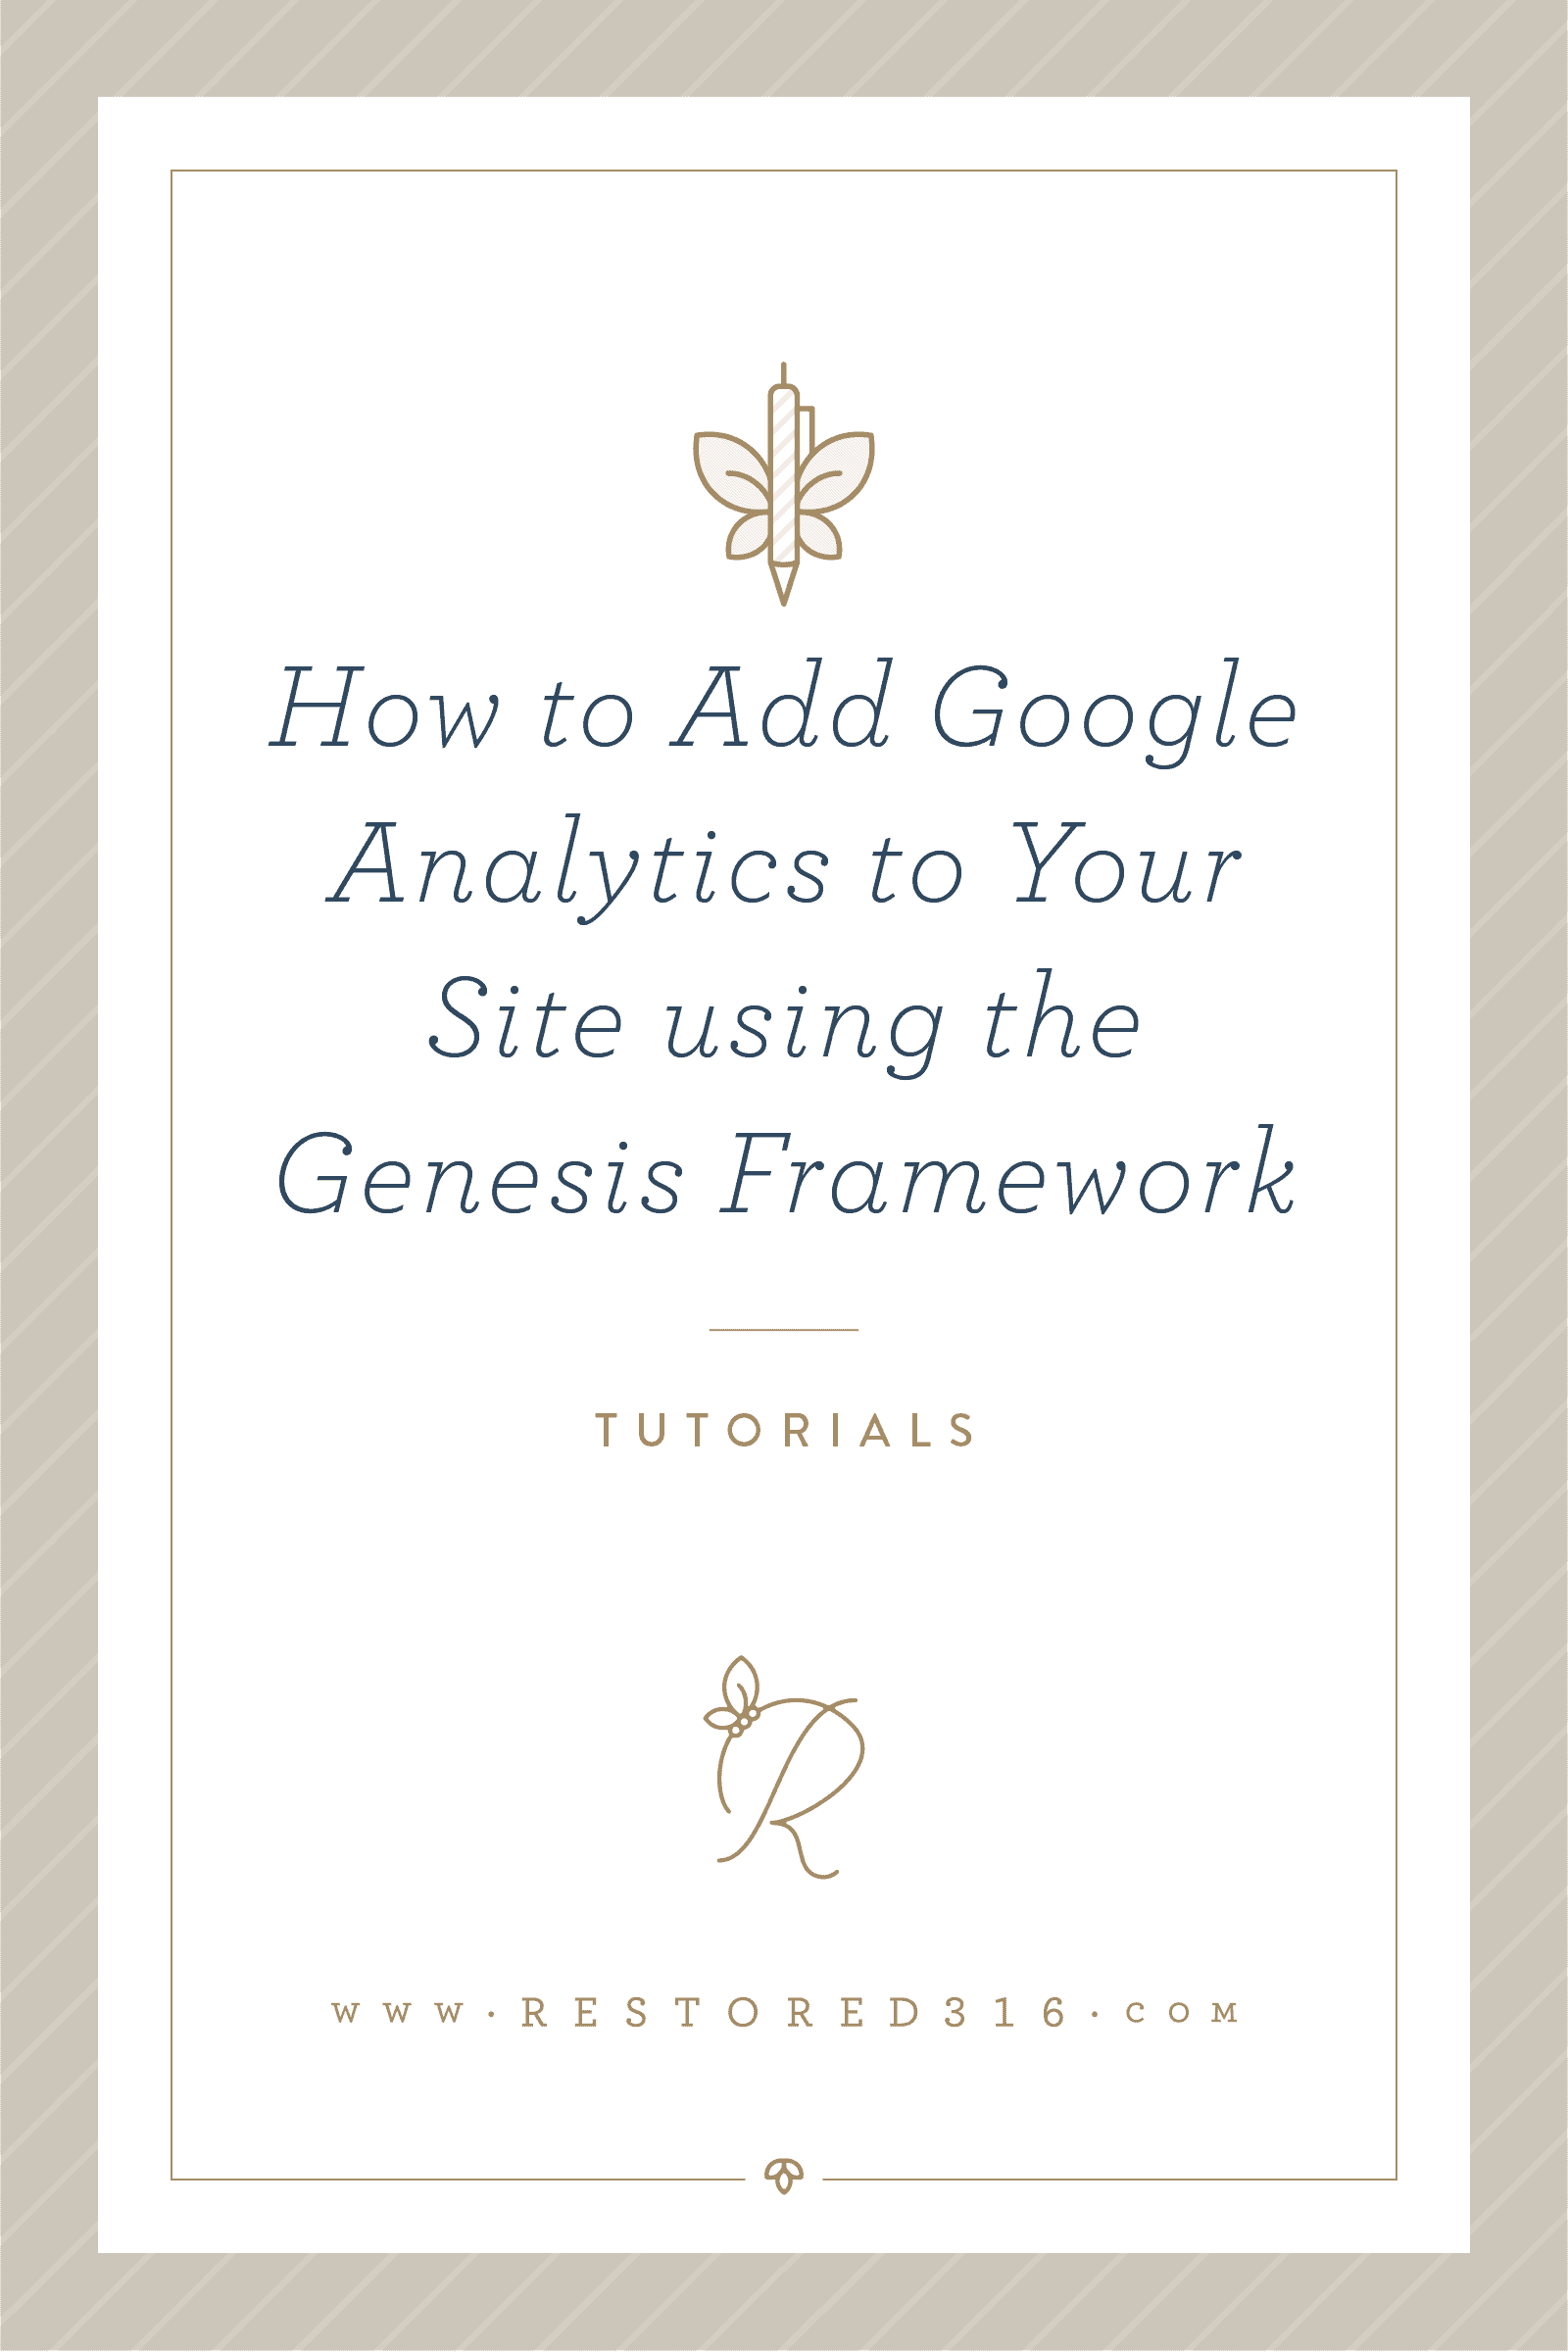 How to Add Google Analytics to Your Site Using the Genesis Framework